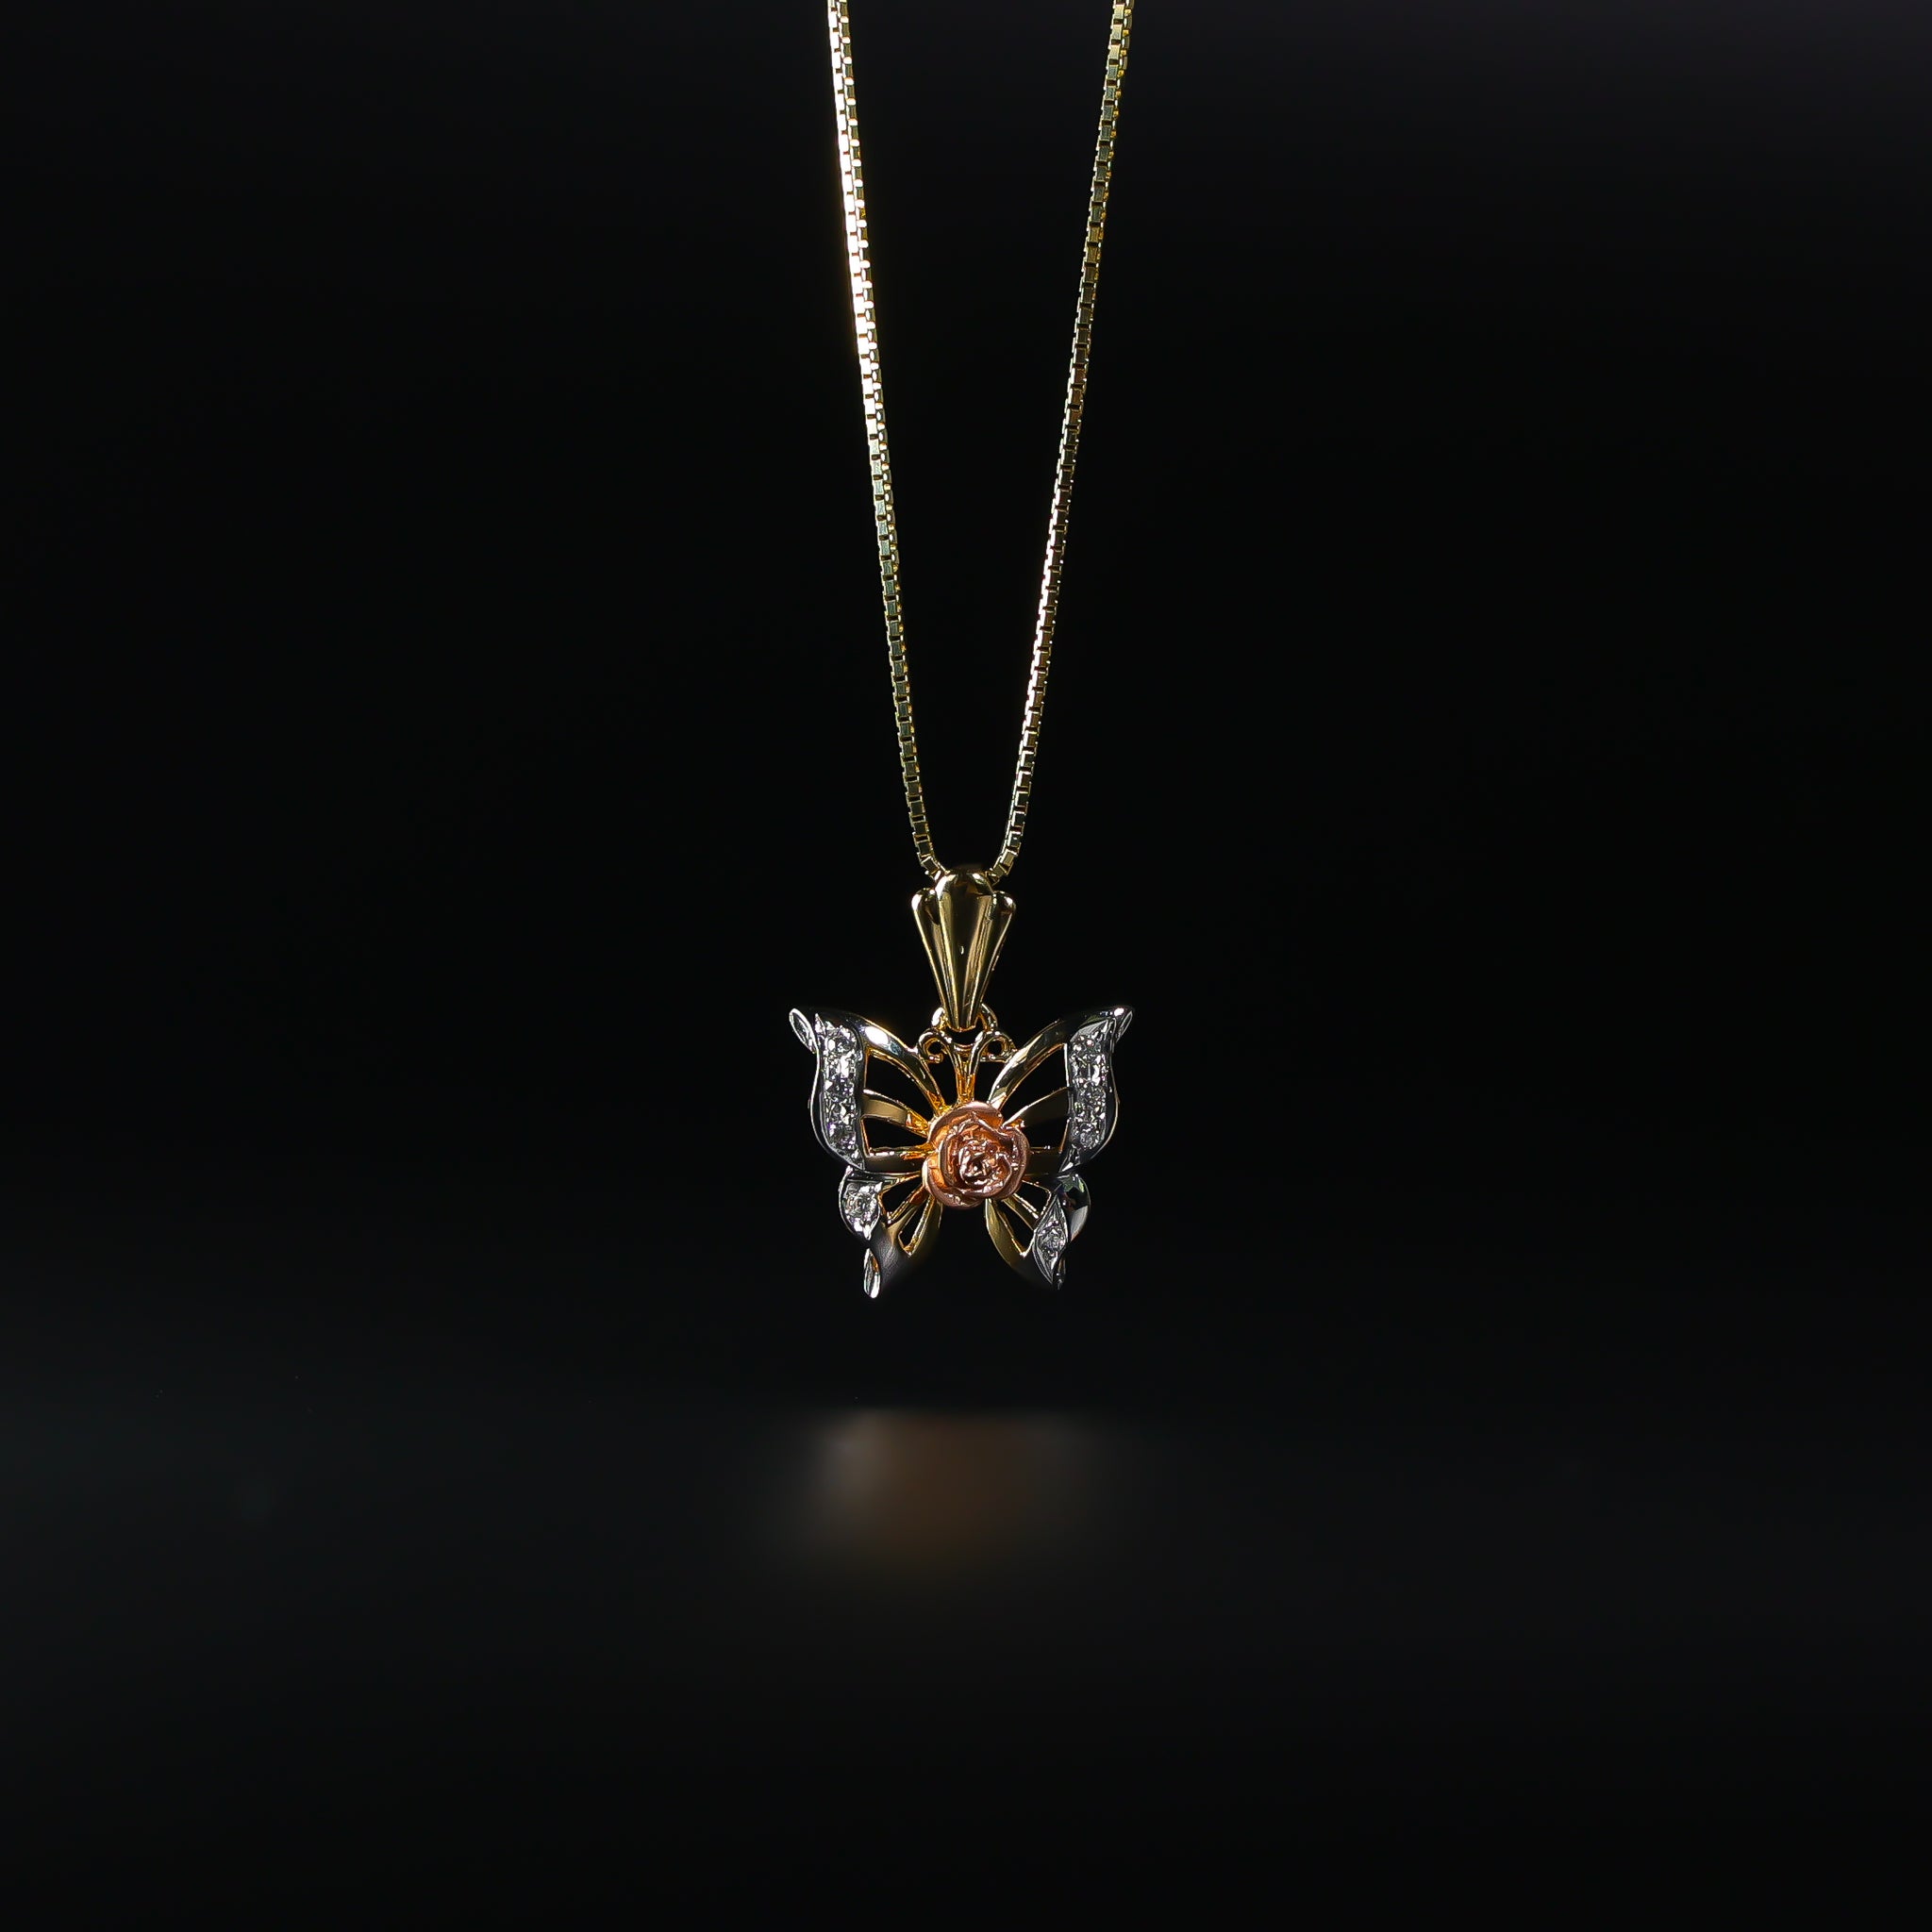 Gold Butterfly Pendant Model-1556 - Charlie & Co. Jewelry